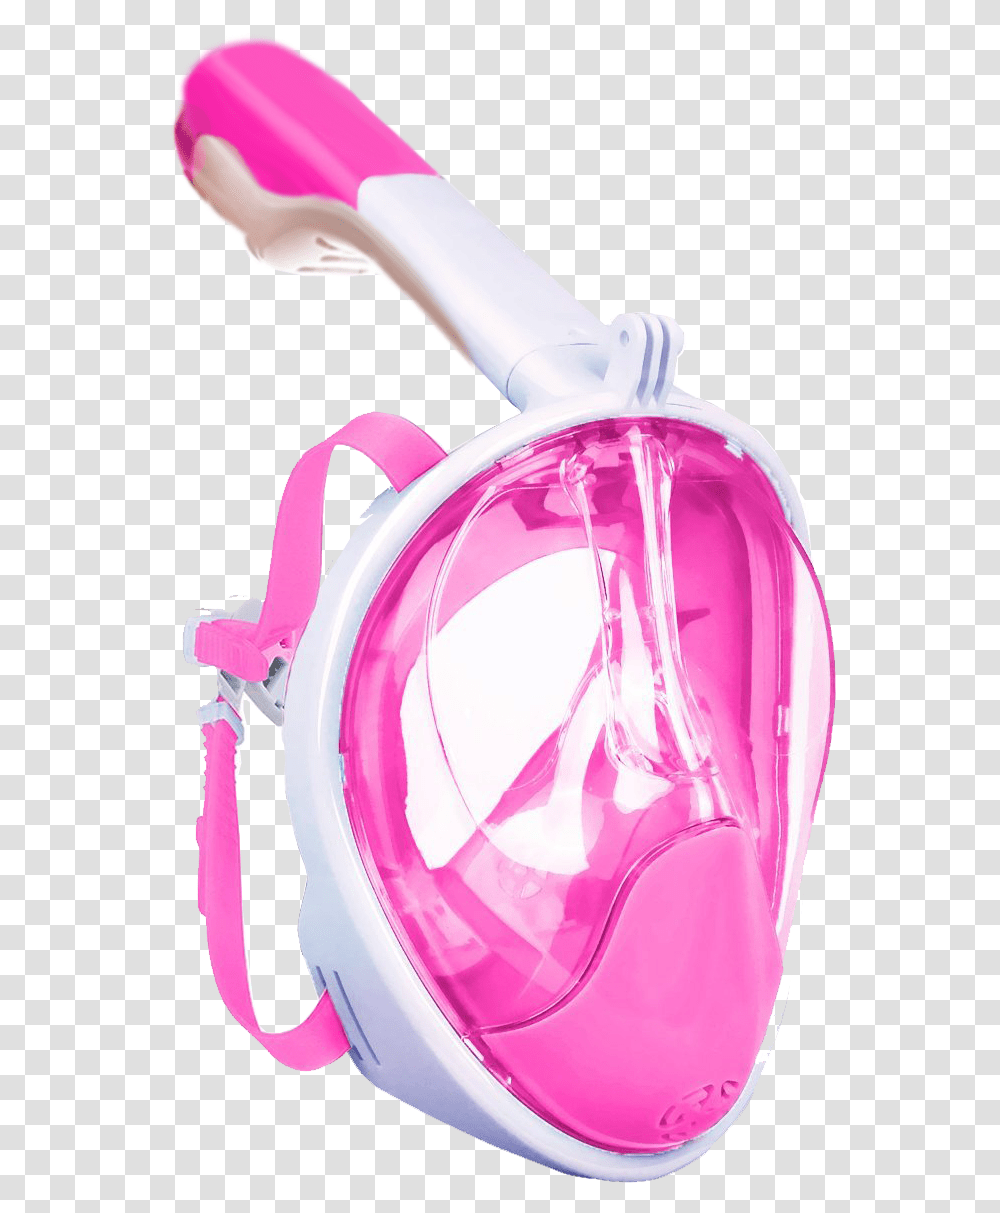 Pink Mask Masca Snorkeling Full Face, Helmet, Goggles, Accessories Transparent Png